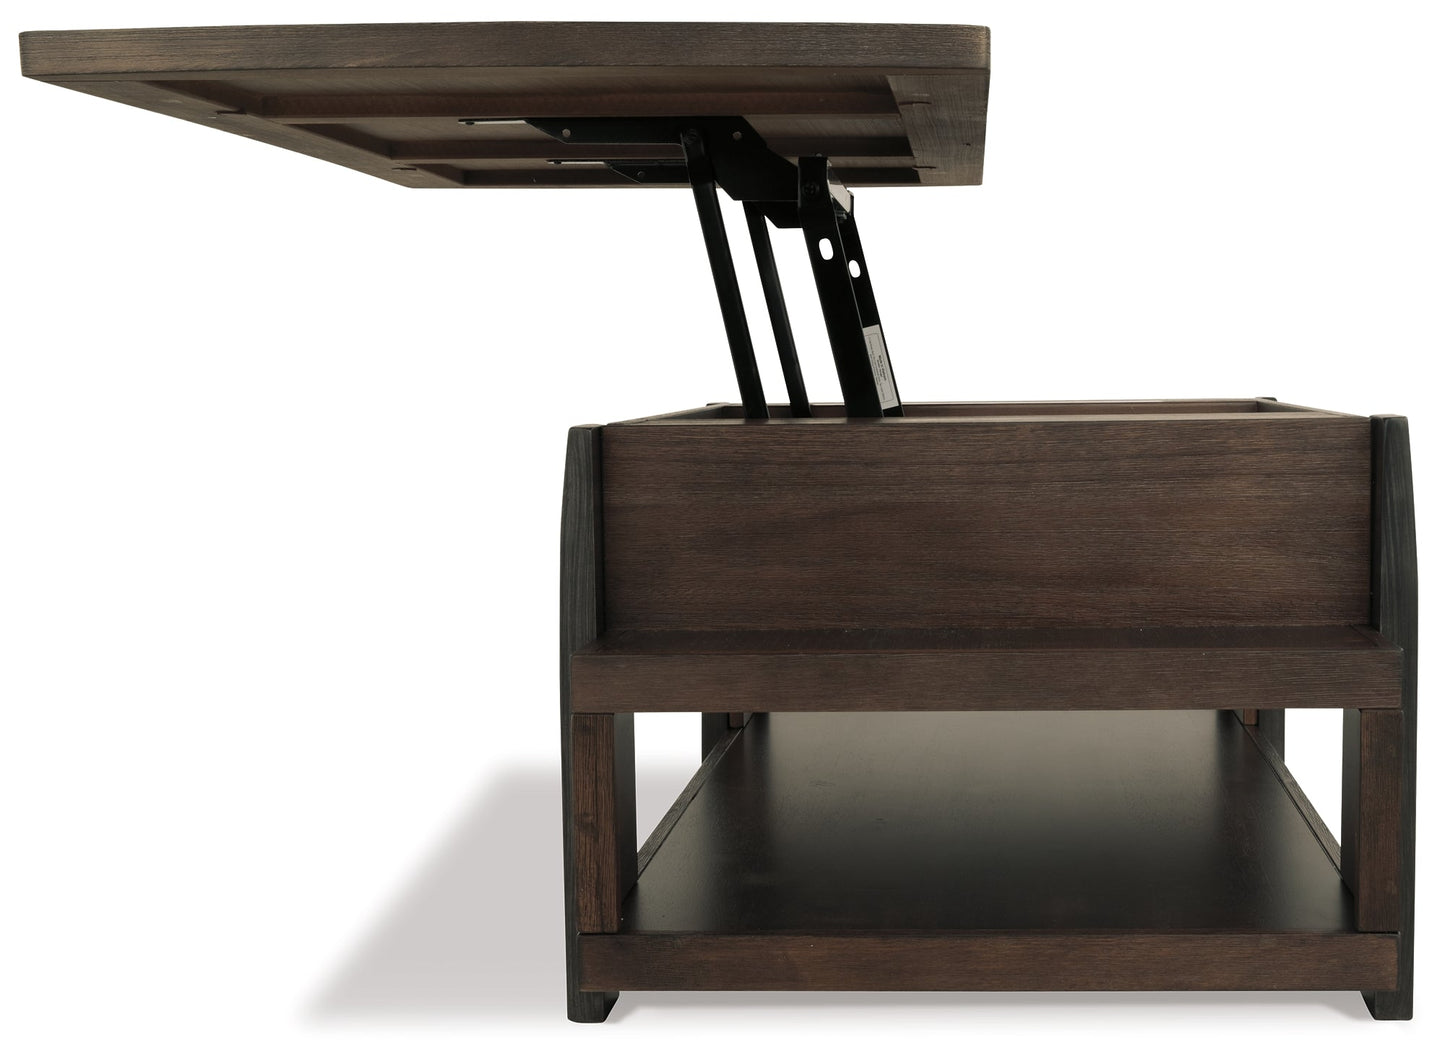 Vailbry Lift Top Cocktail Table Smyrna Furniture Outlet